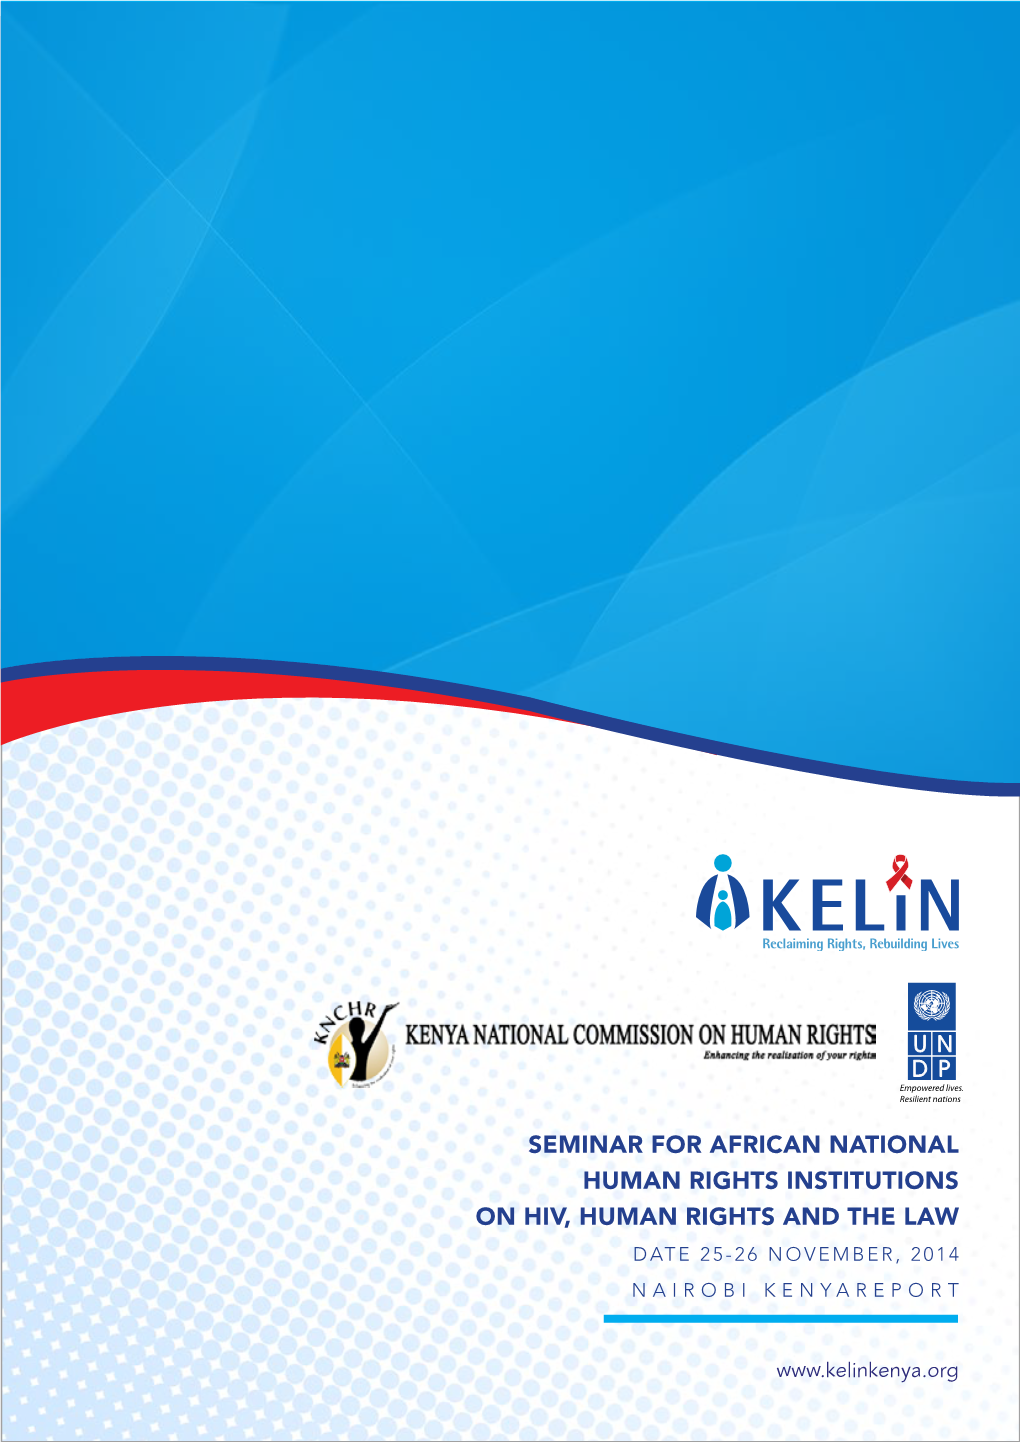 Seminar for African National Human Rights Institutions on Hiv, Human Rights and the Law Date 25-26 November, 2014 Nairobi Kenyareport